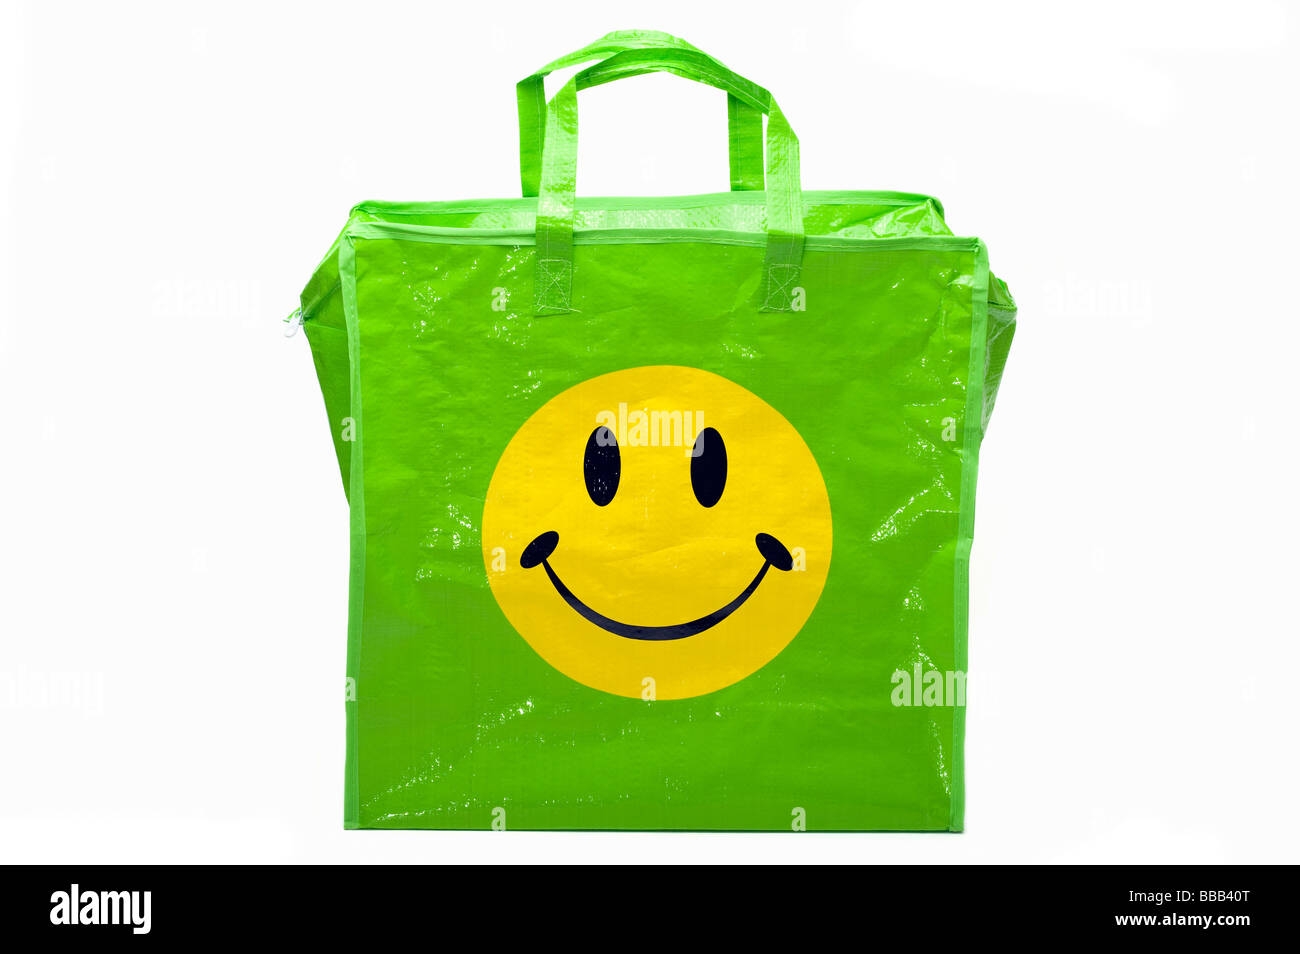 Green and yellow smiley face on a plastic carrier bag Stock Photo